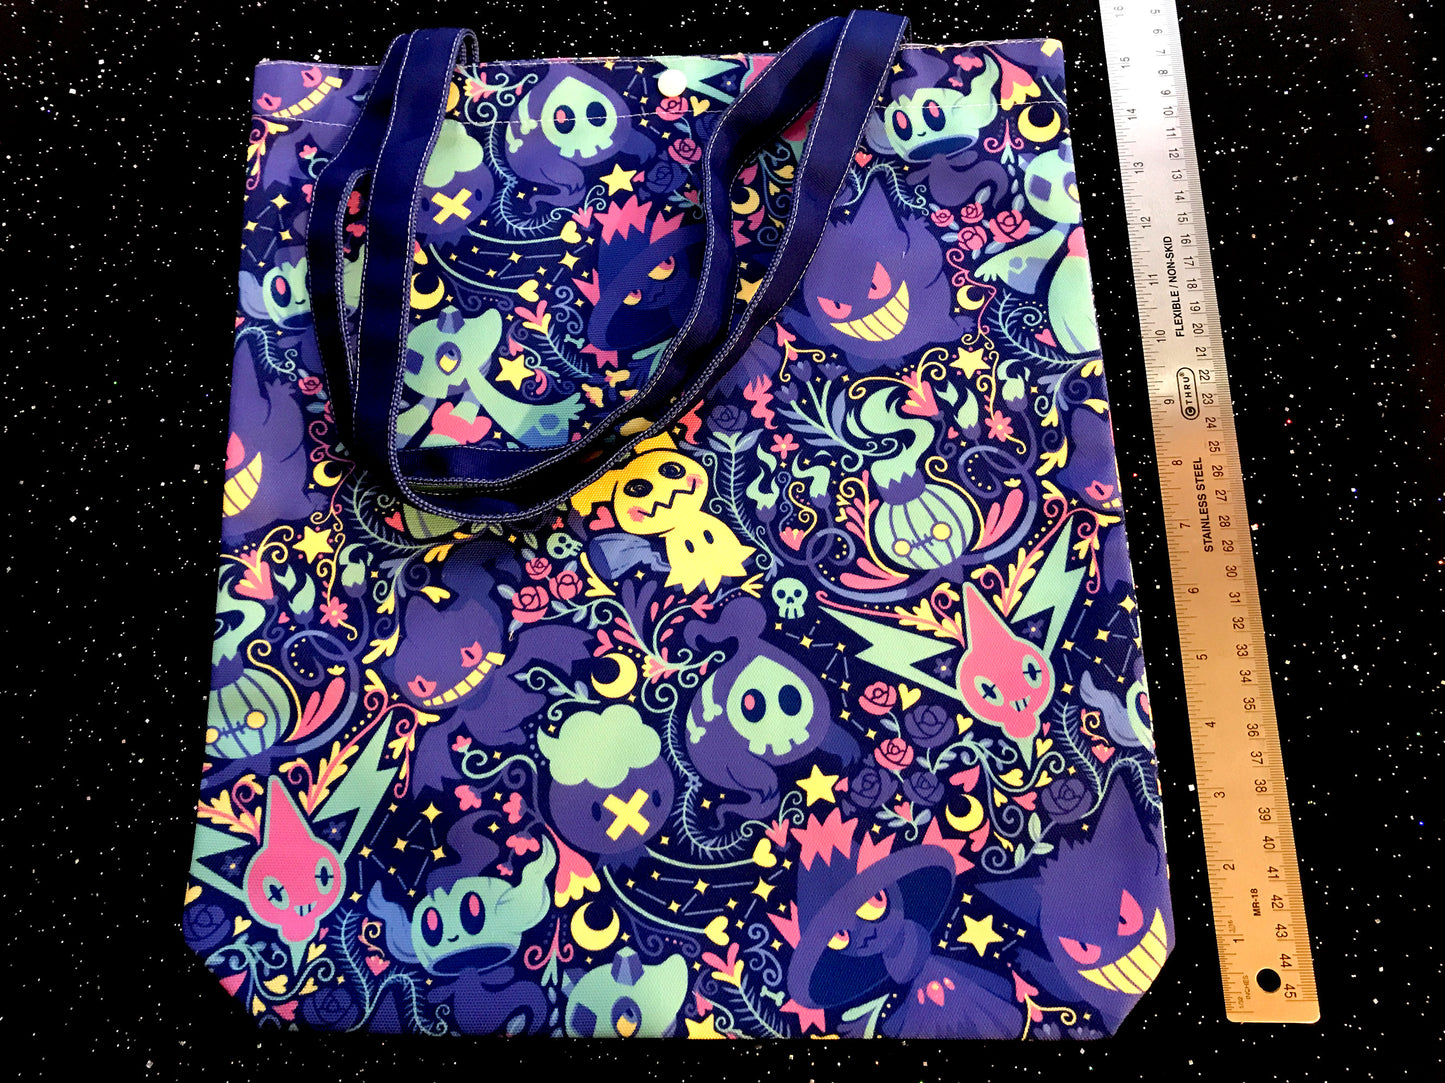 90's Toybox Tote Bag